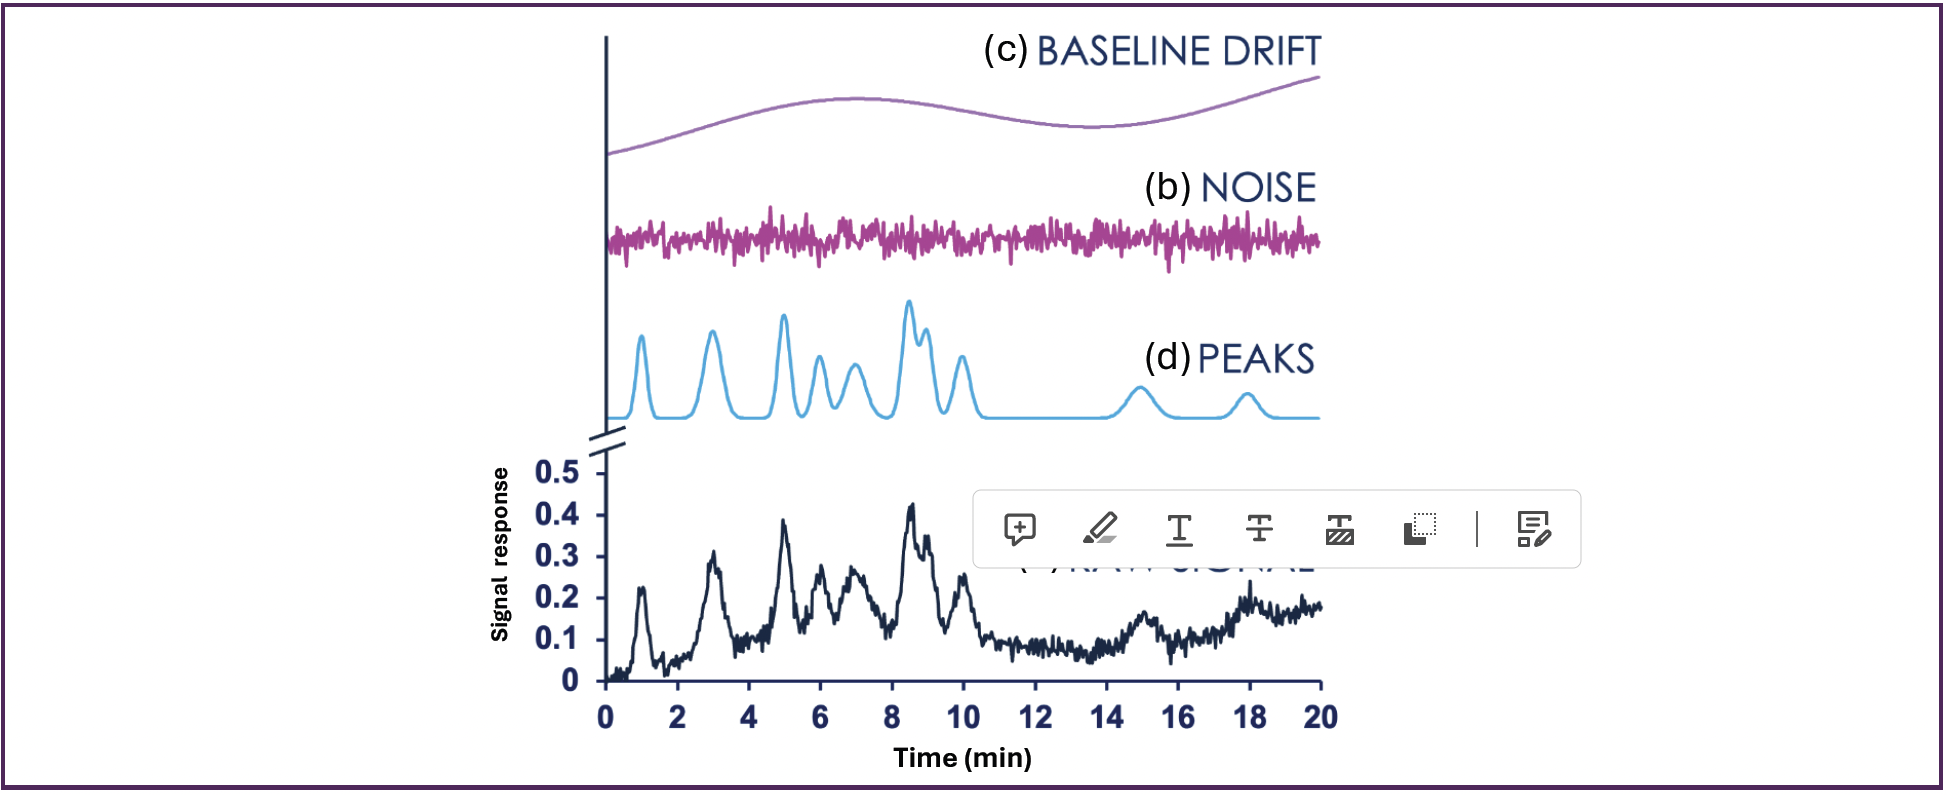 FIGURE 1: (a) A raw chromatographic signal decomposed into different frequency components: (b) the high-frequency noise, (c) the low-frequency baseline drift, and (d) the medium-frequency chromatographic peaks.